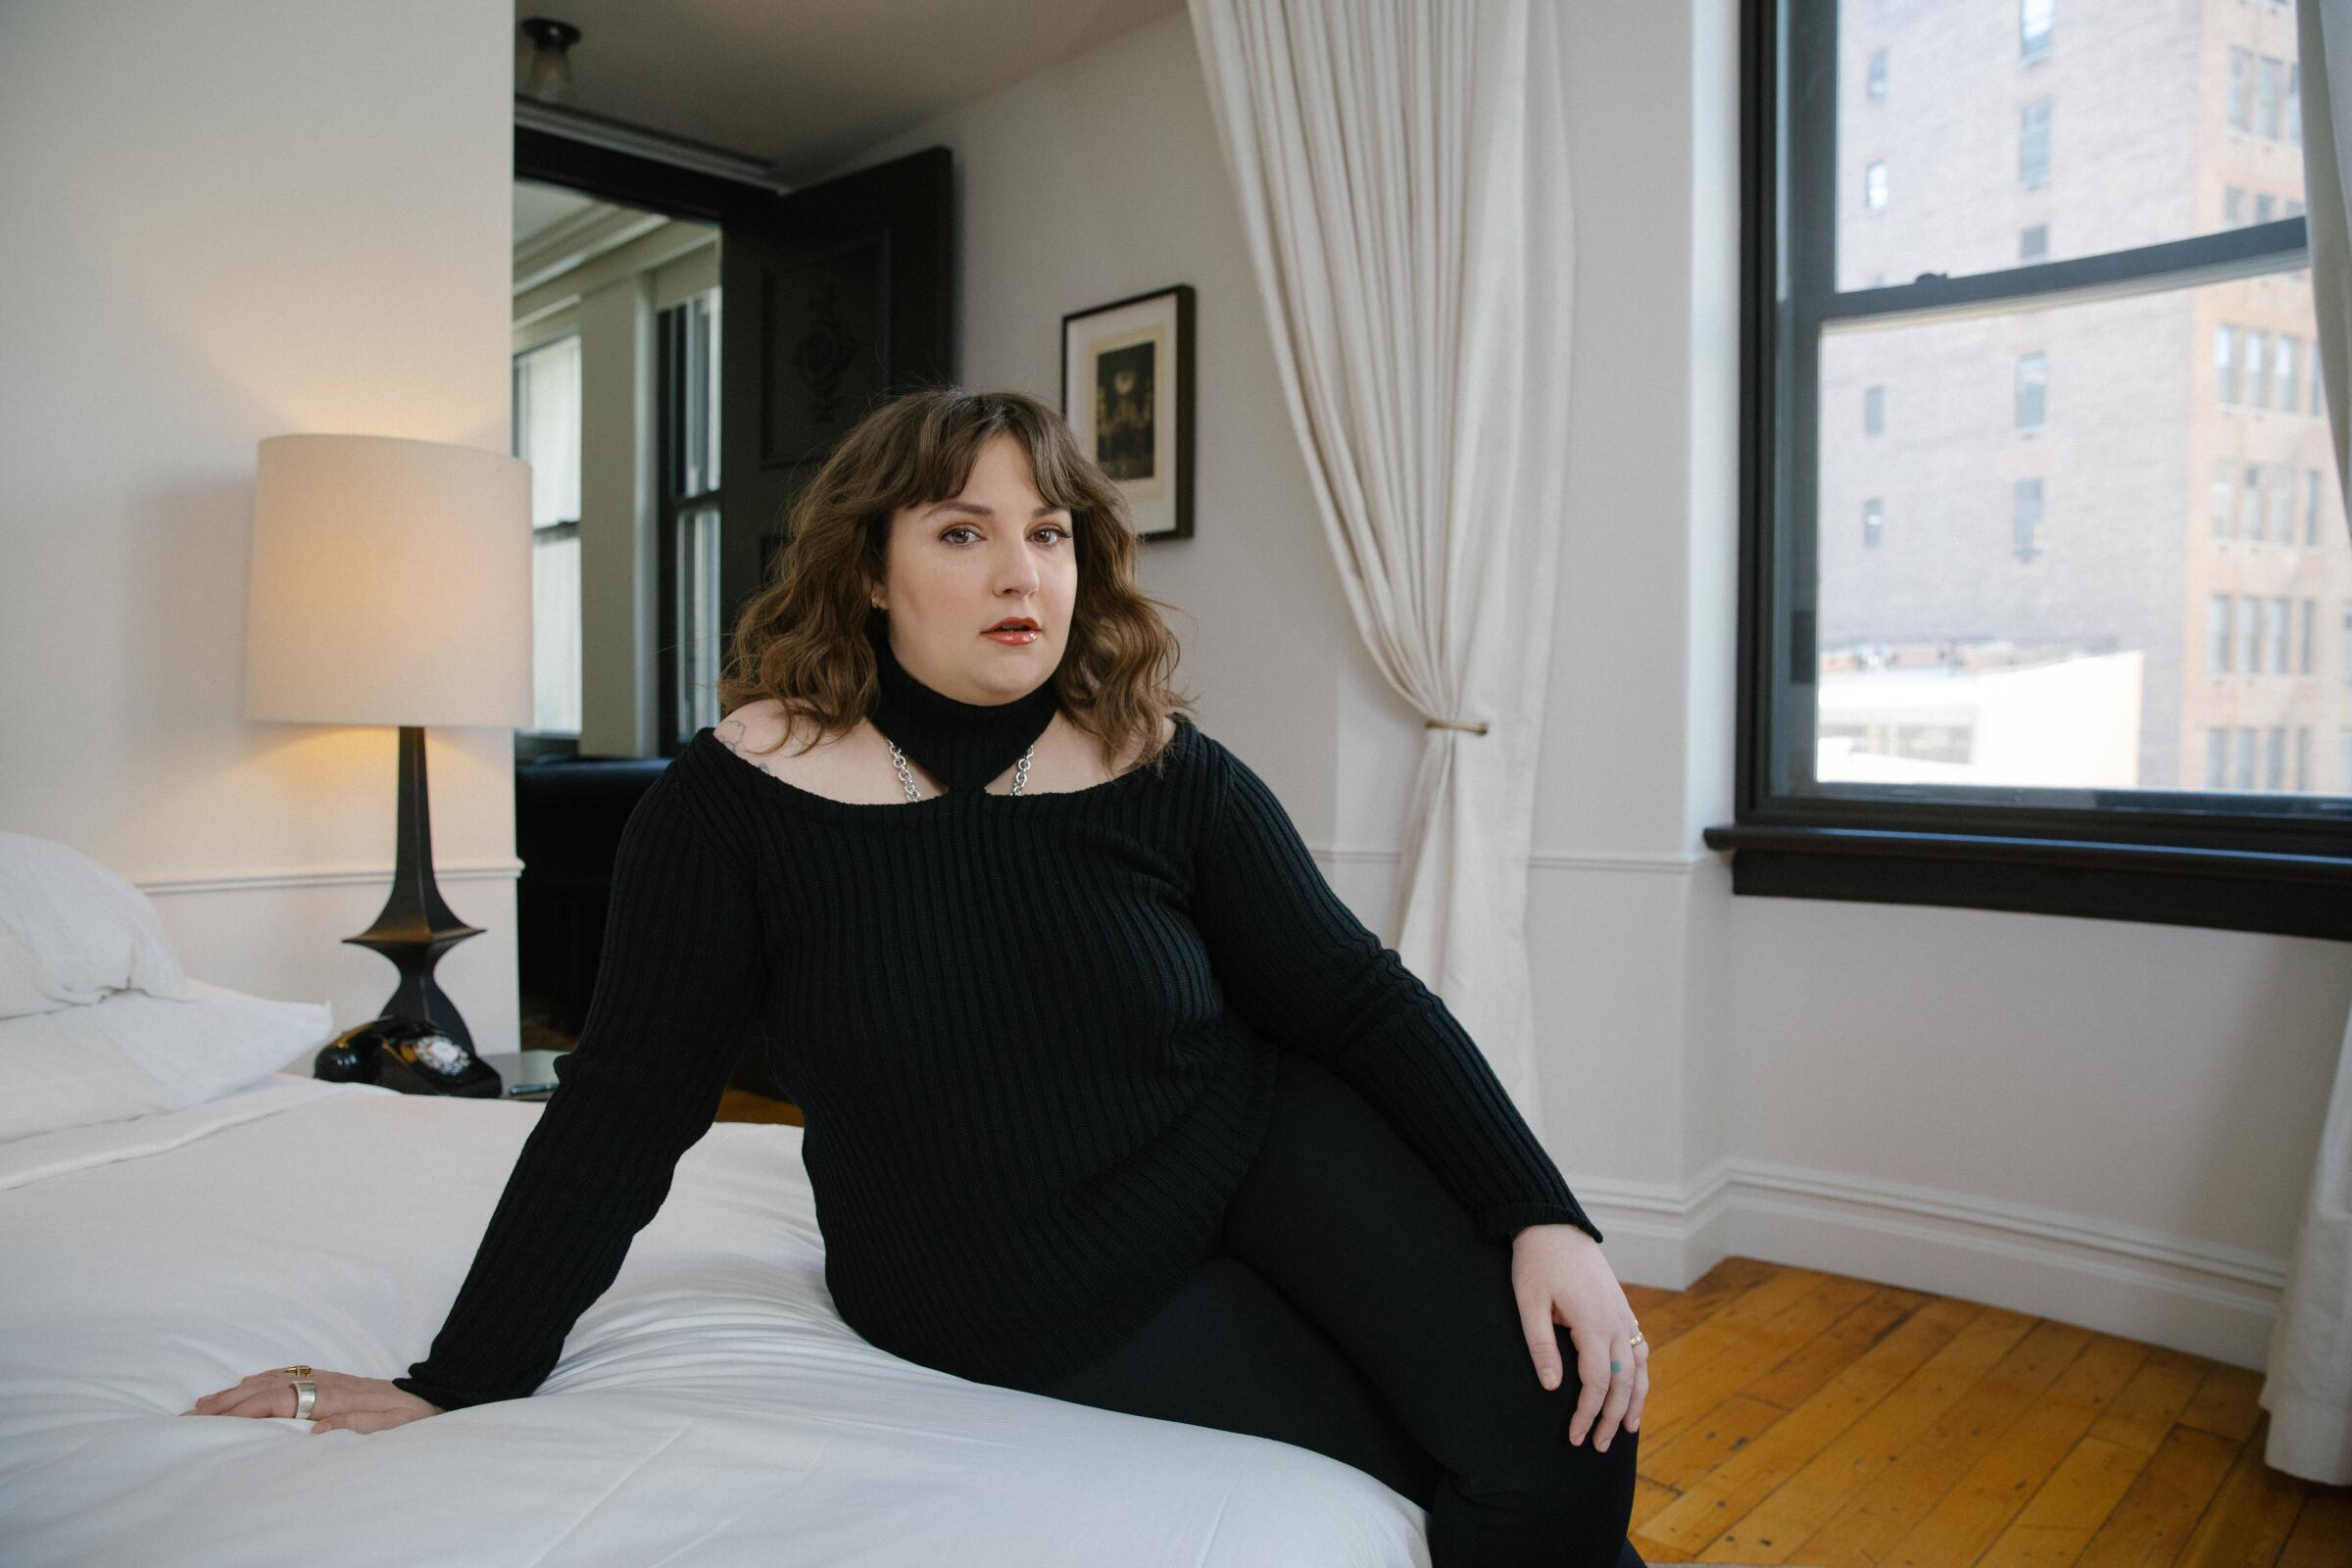 Lena Dunham sits on a white bed in a black dress for a portrait.